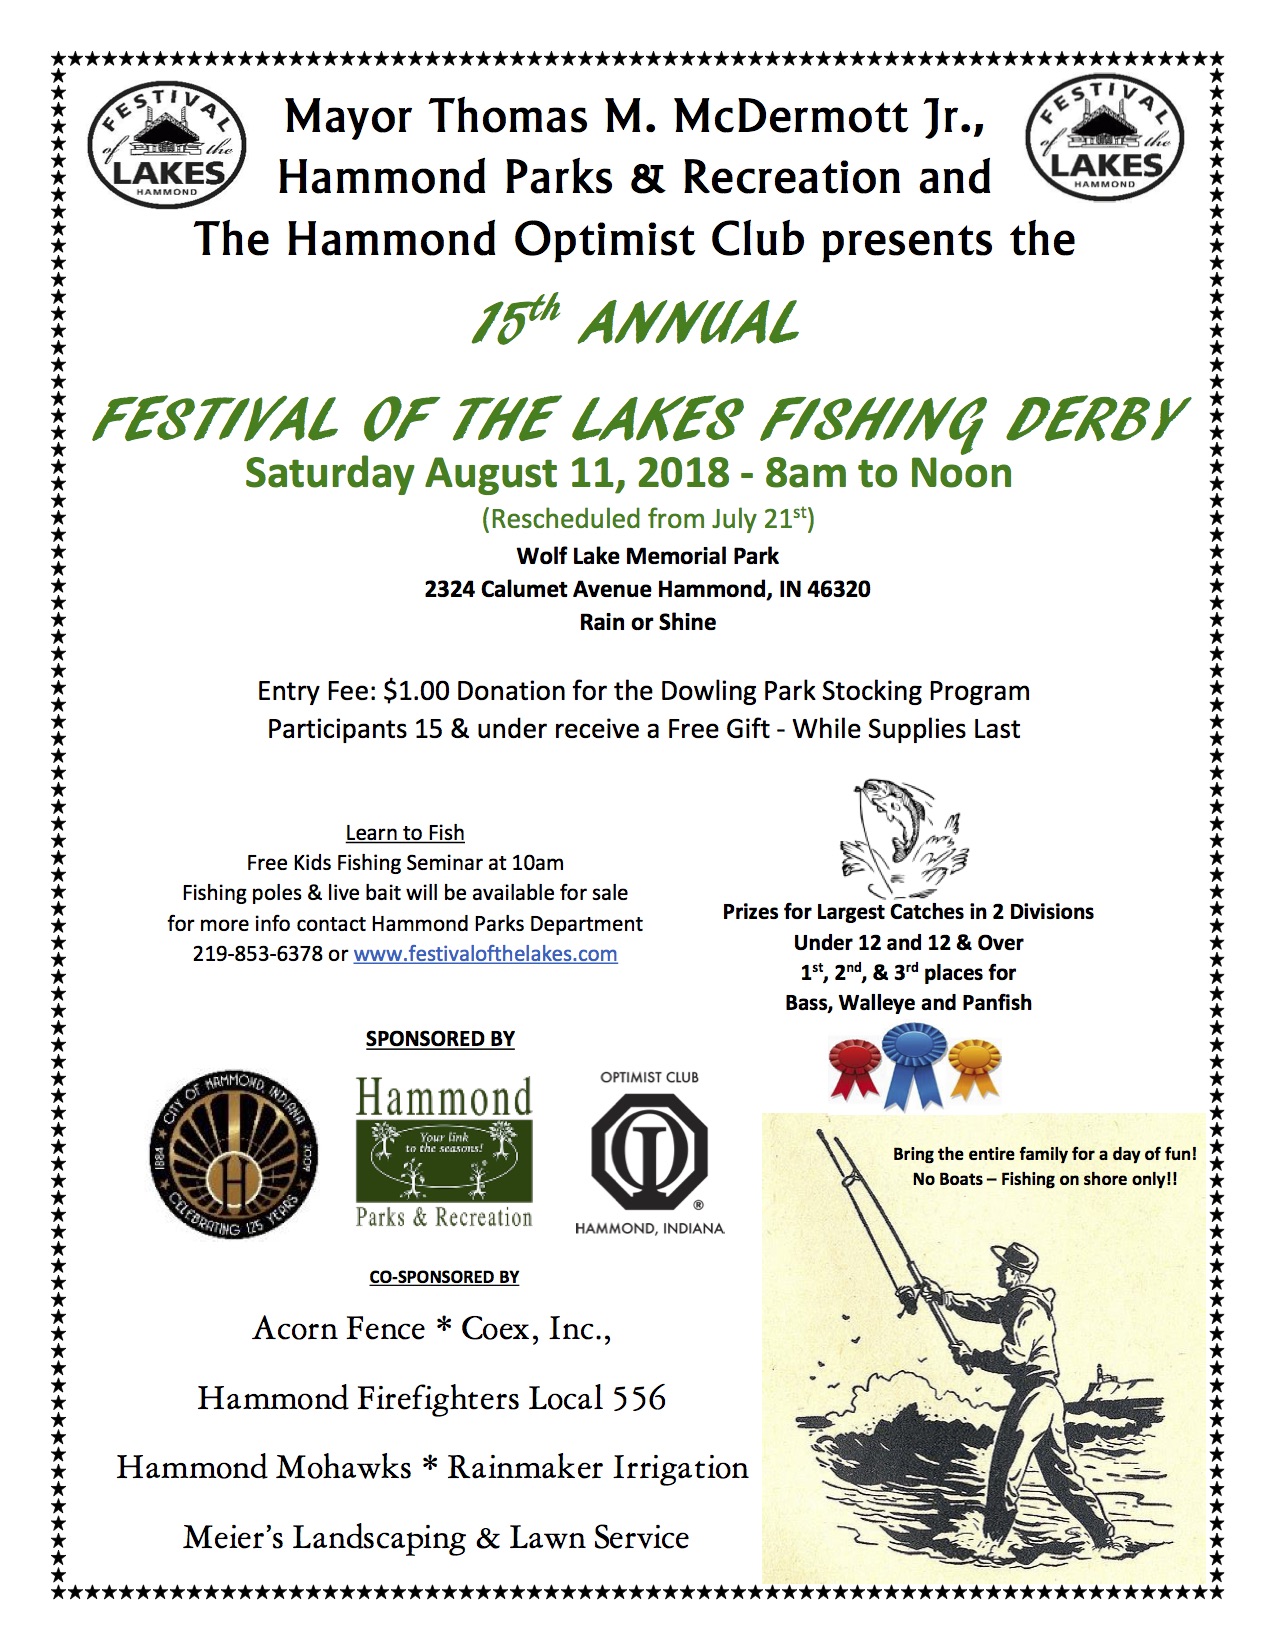 City of Hammond Announces Date of Rescheduled Festival of the Lakes Fishing Derby